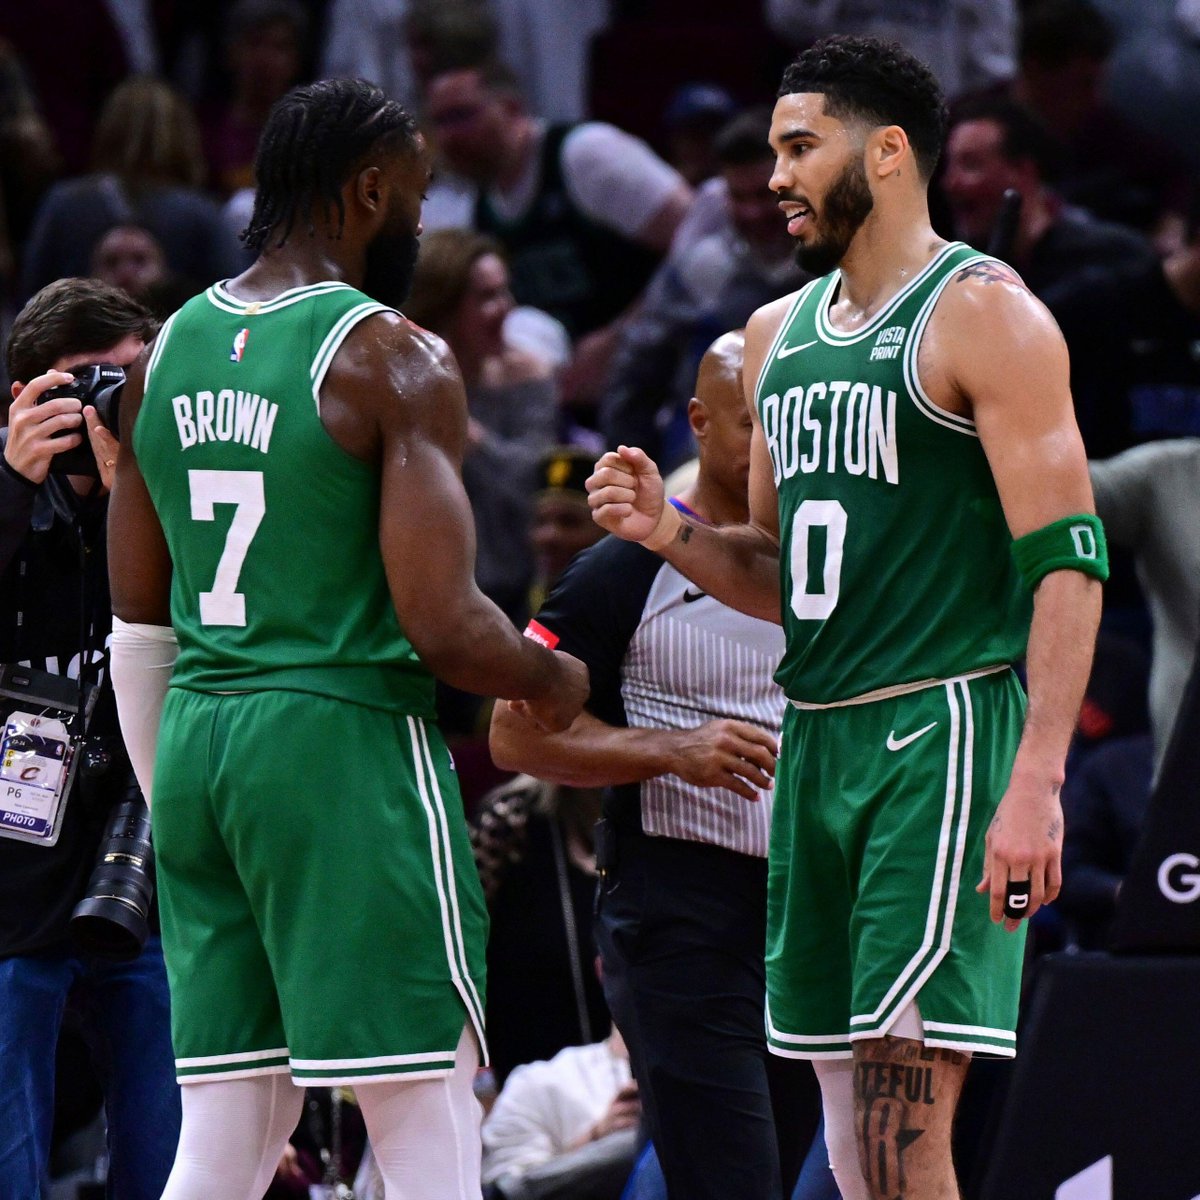 ☘️ CELTICS ADVANCE! Boston are through to the Eastern Conference Finals for the third straight year. #NBAPlayoffs | #DifferentHere